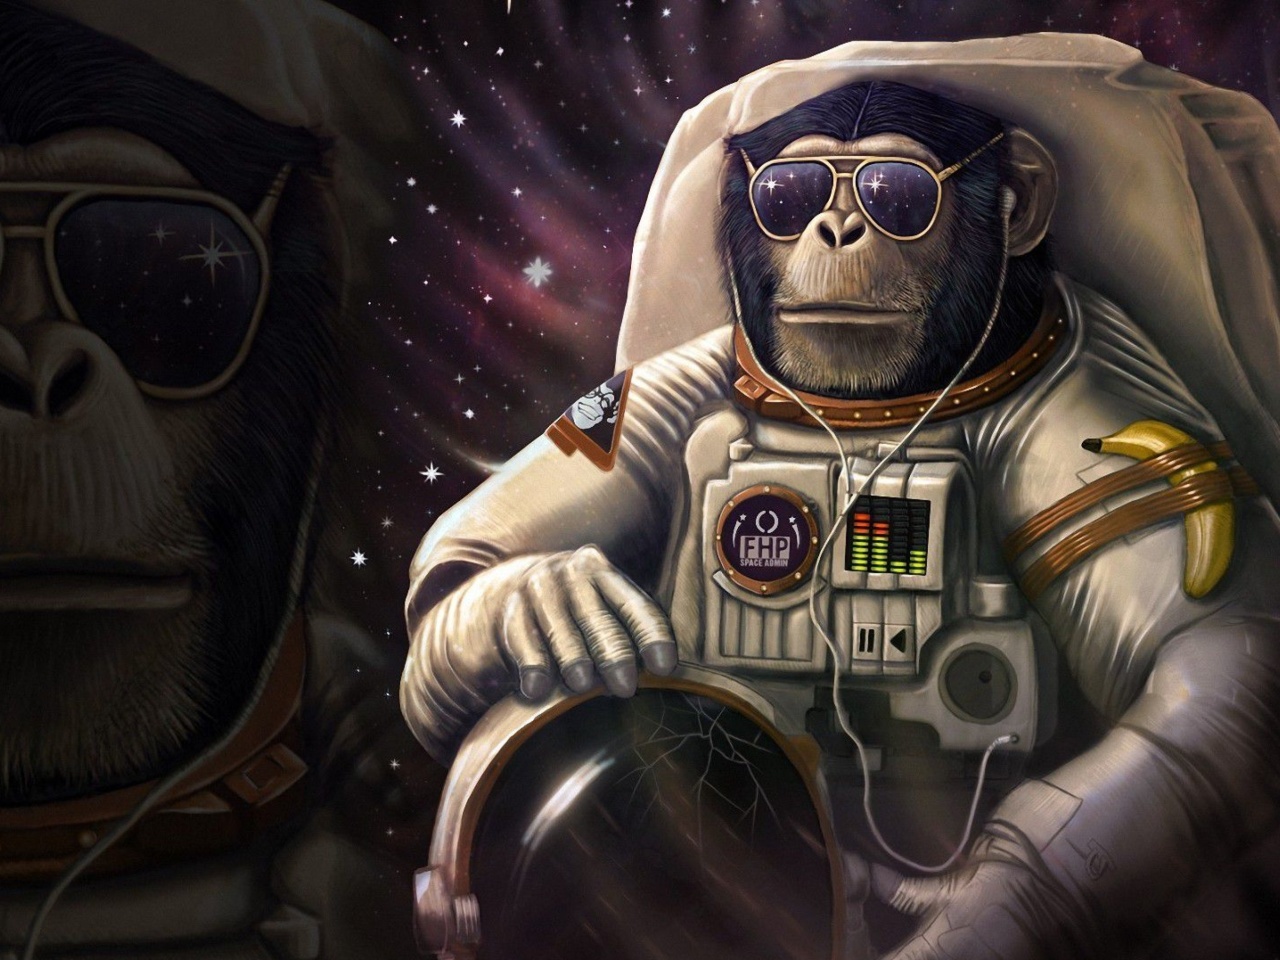 Das Monkeys and apes in space Wallpaper 1280x960